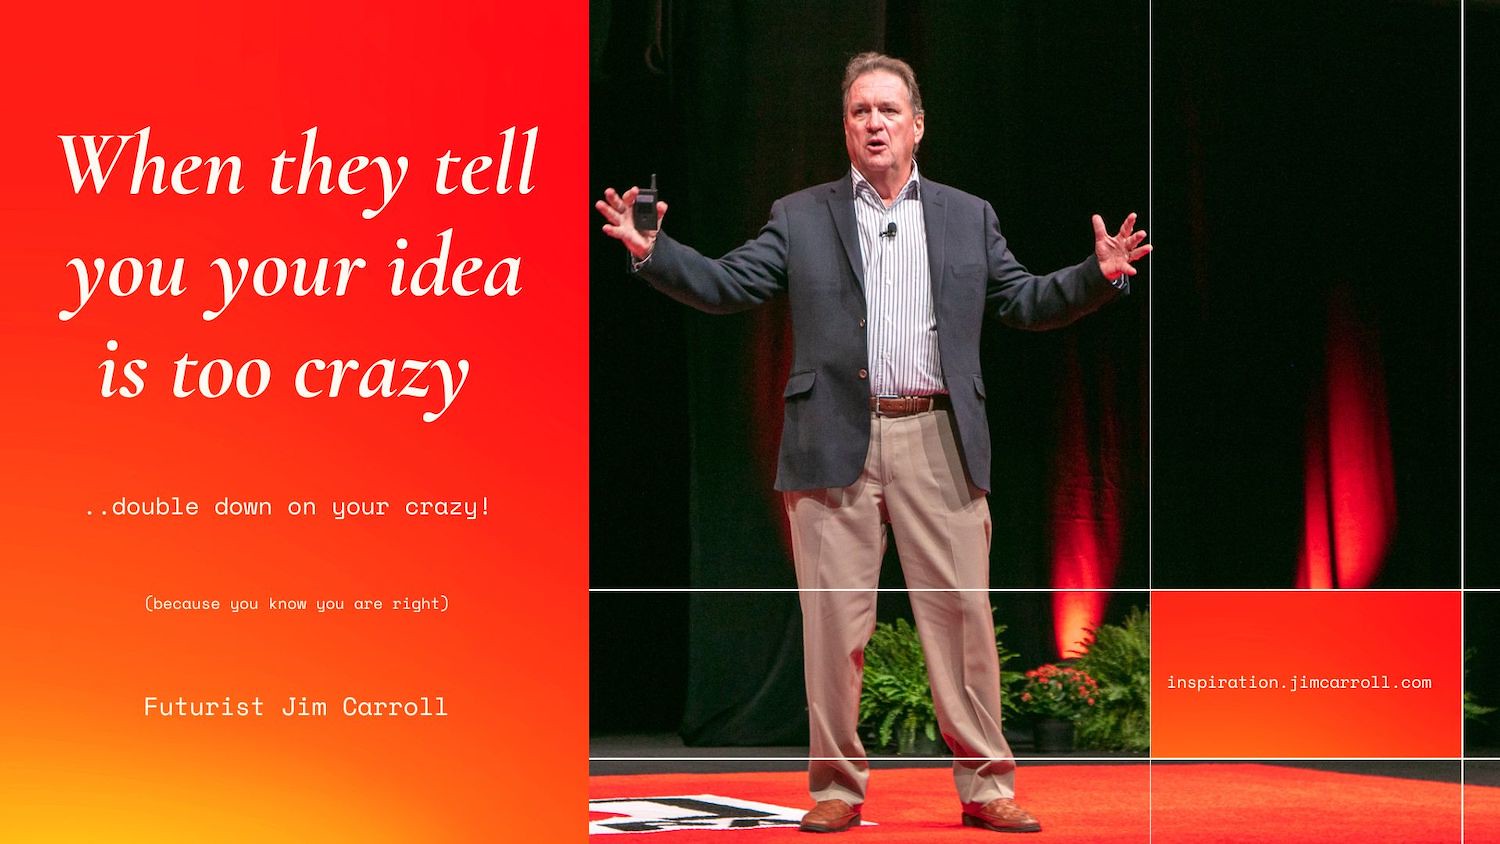 "When they tell you your idea is too crazy ... double down on your crazy!" - Futurist Jim Carroll